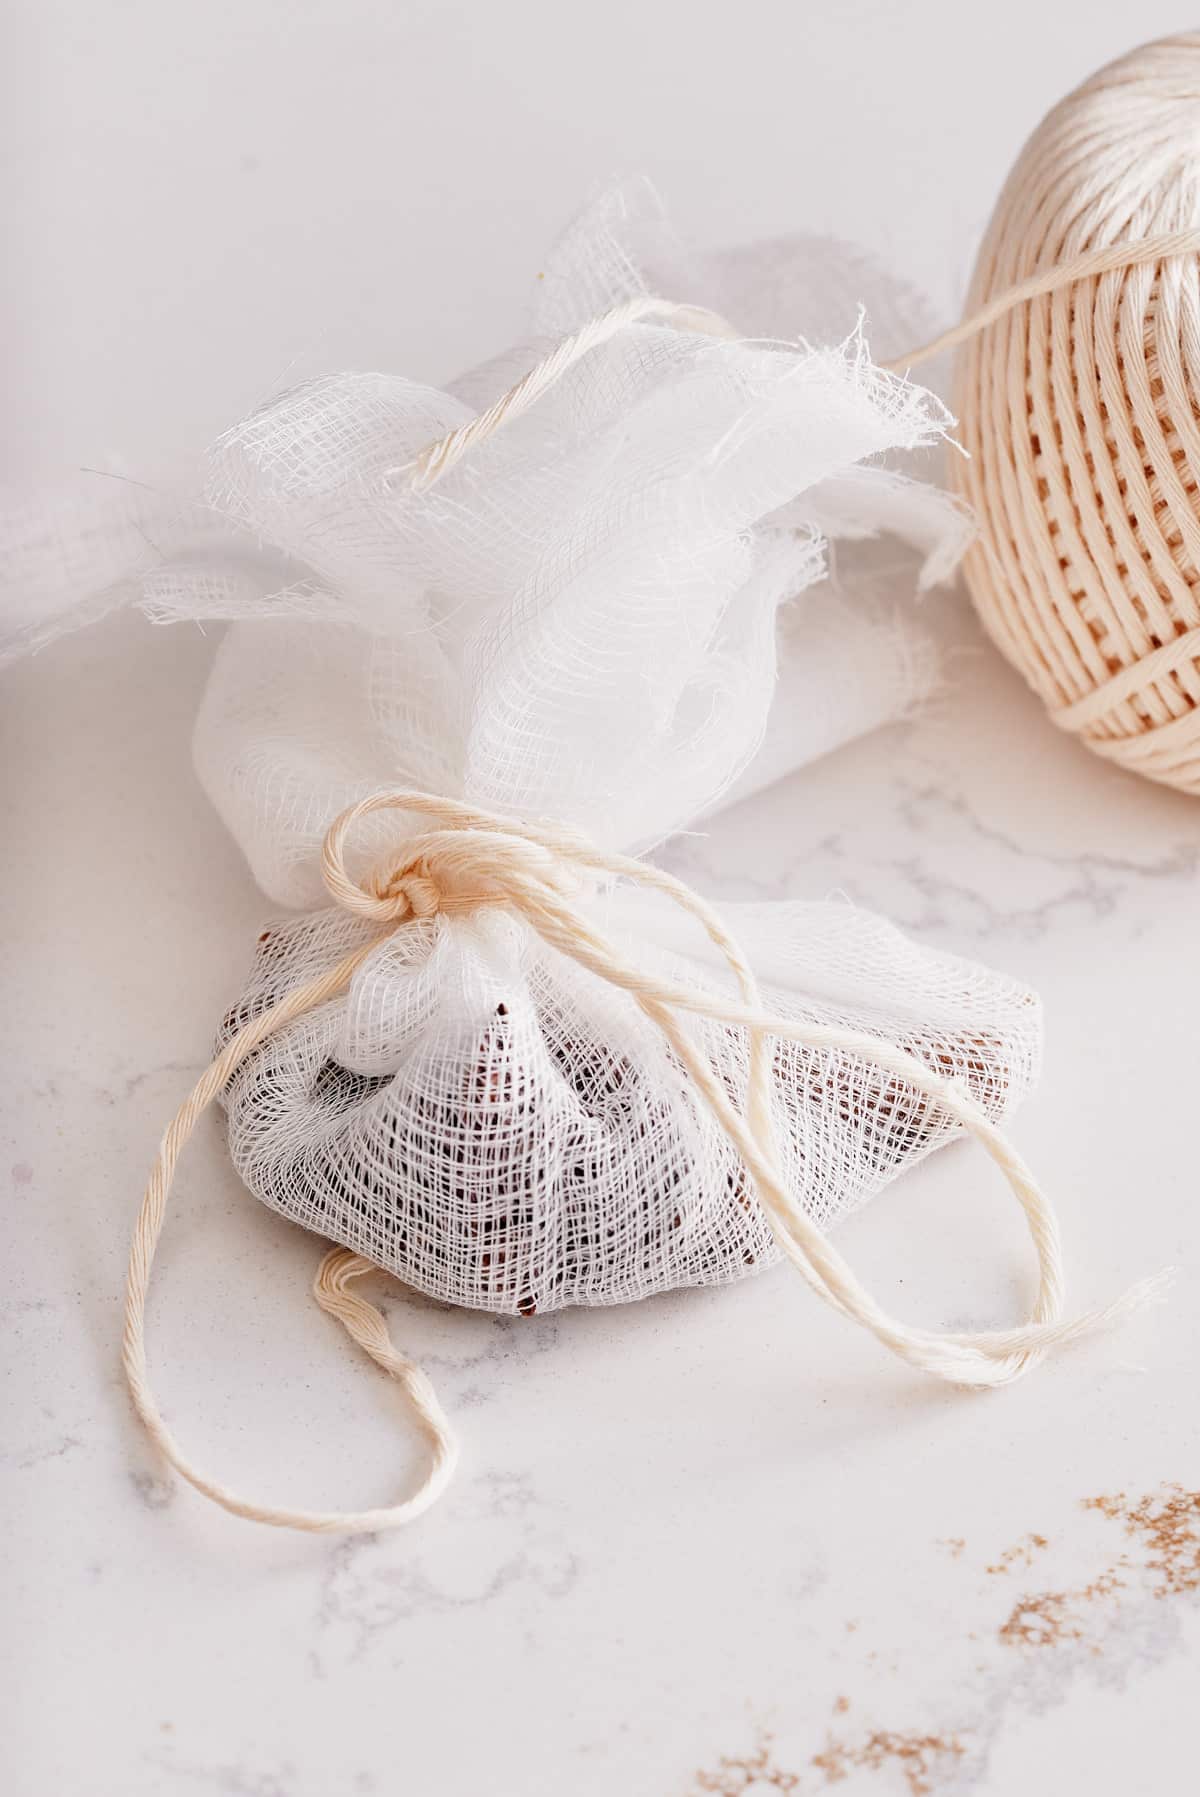 A cheesecloth sachet tied with string and filled with whole spices.